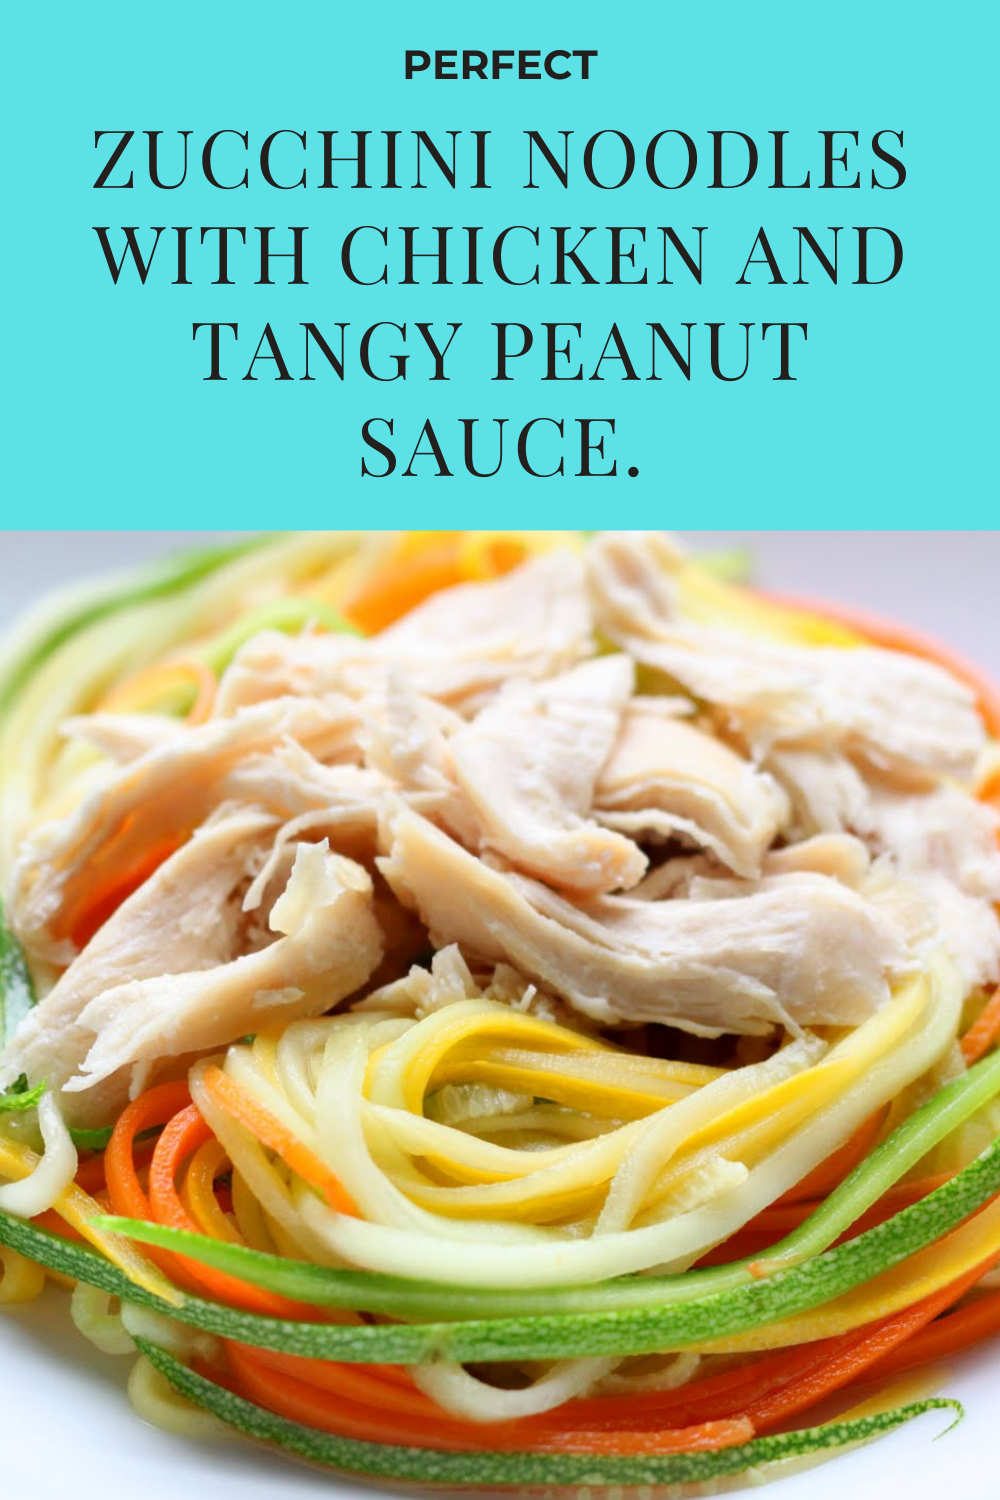 Perfect Zucchini Noodles with Chicken and Tangy Peanut Sauce.